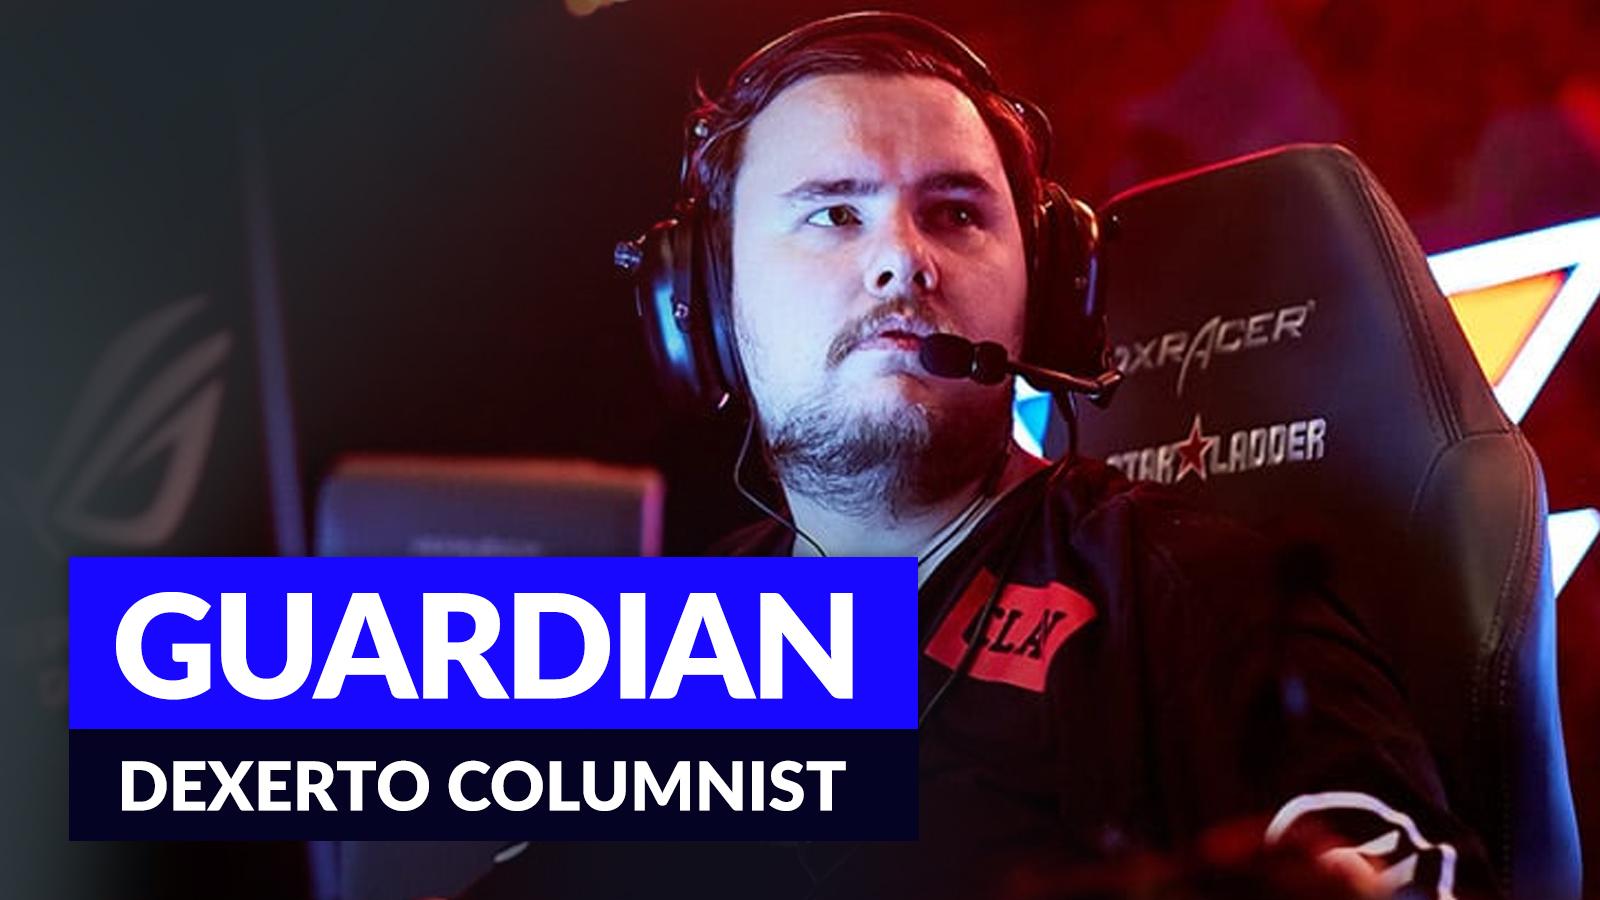 GuardiaN competing in CSGO.